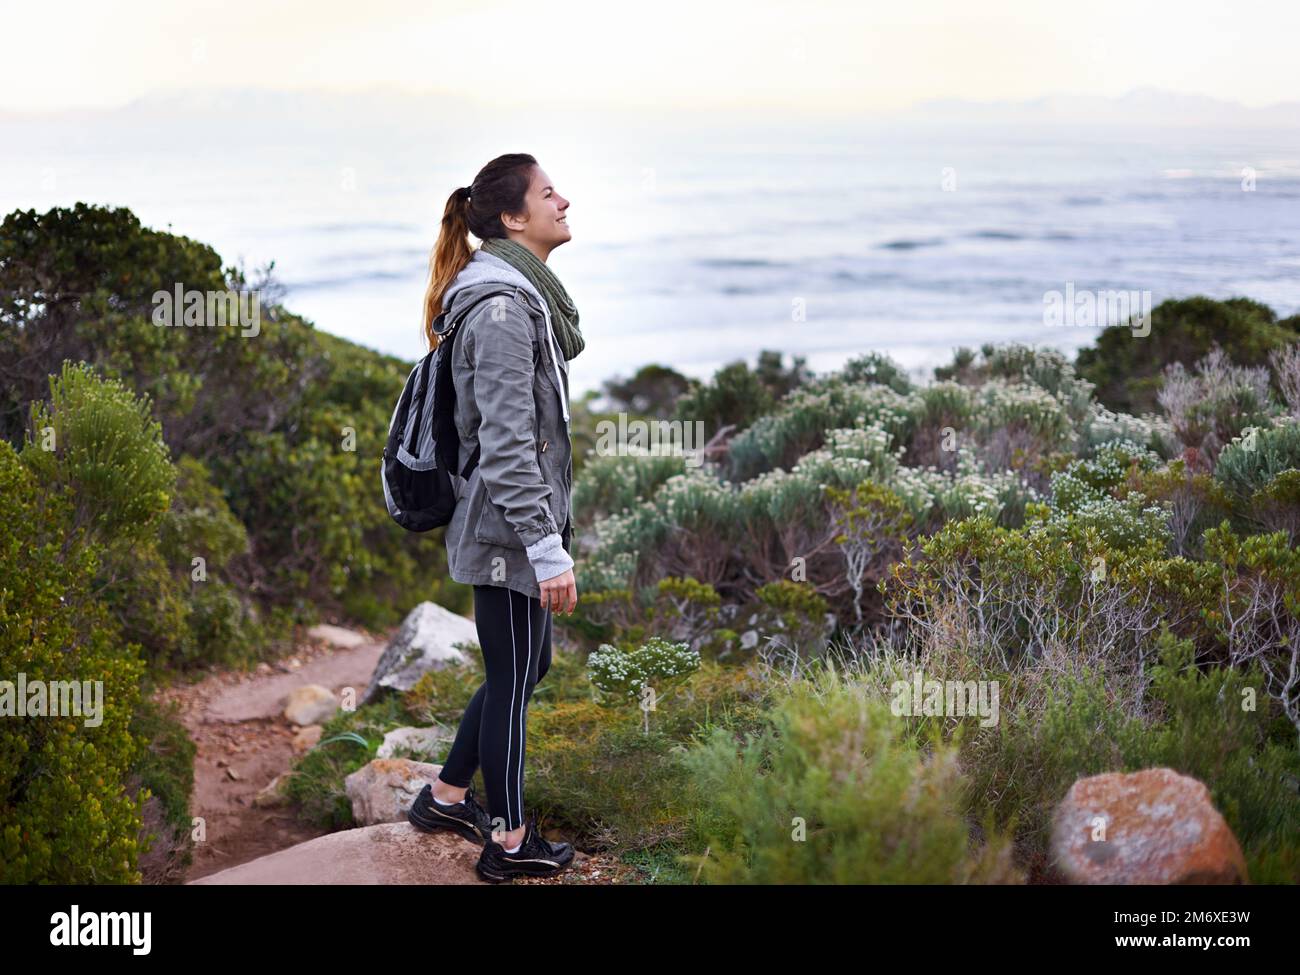 Theres nothing quite like this. a young woman enjoying nature while out hiking. Stock Photo